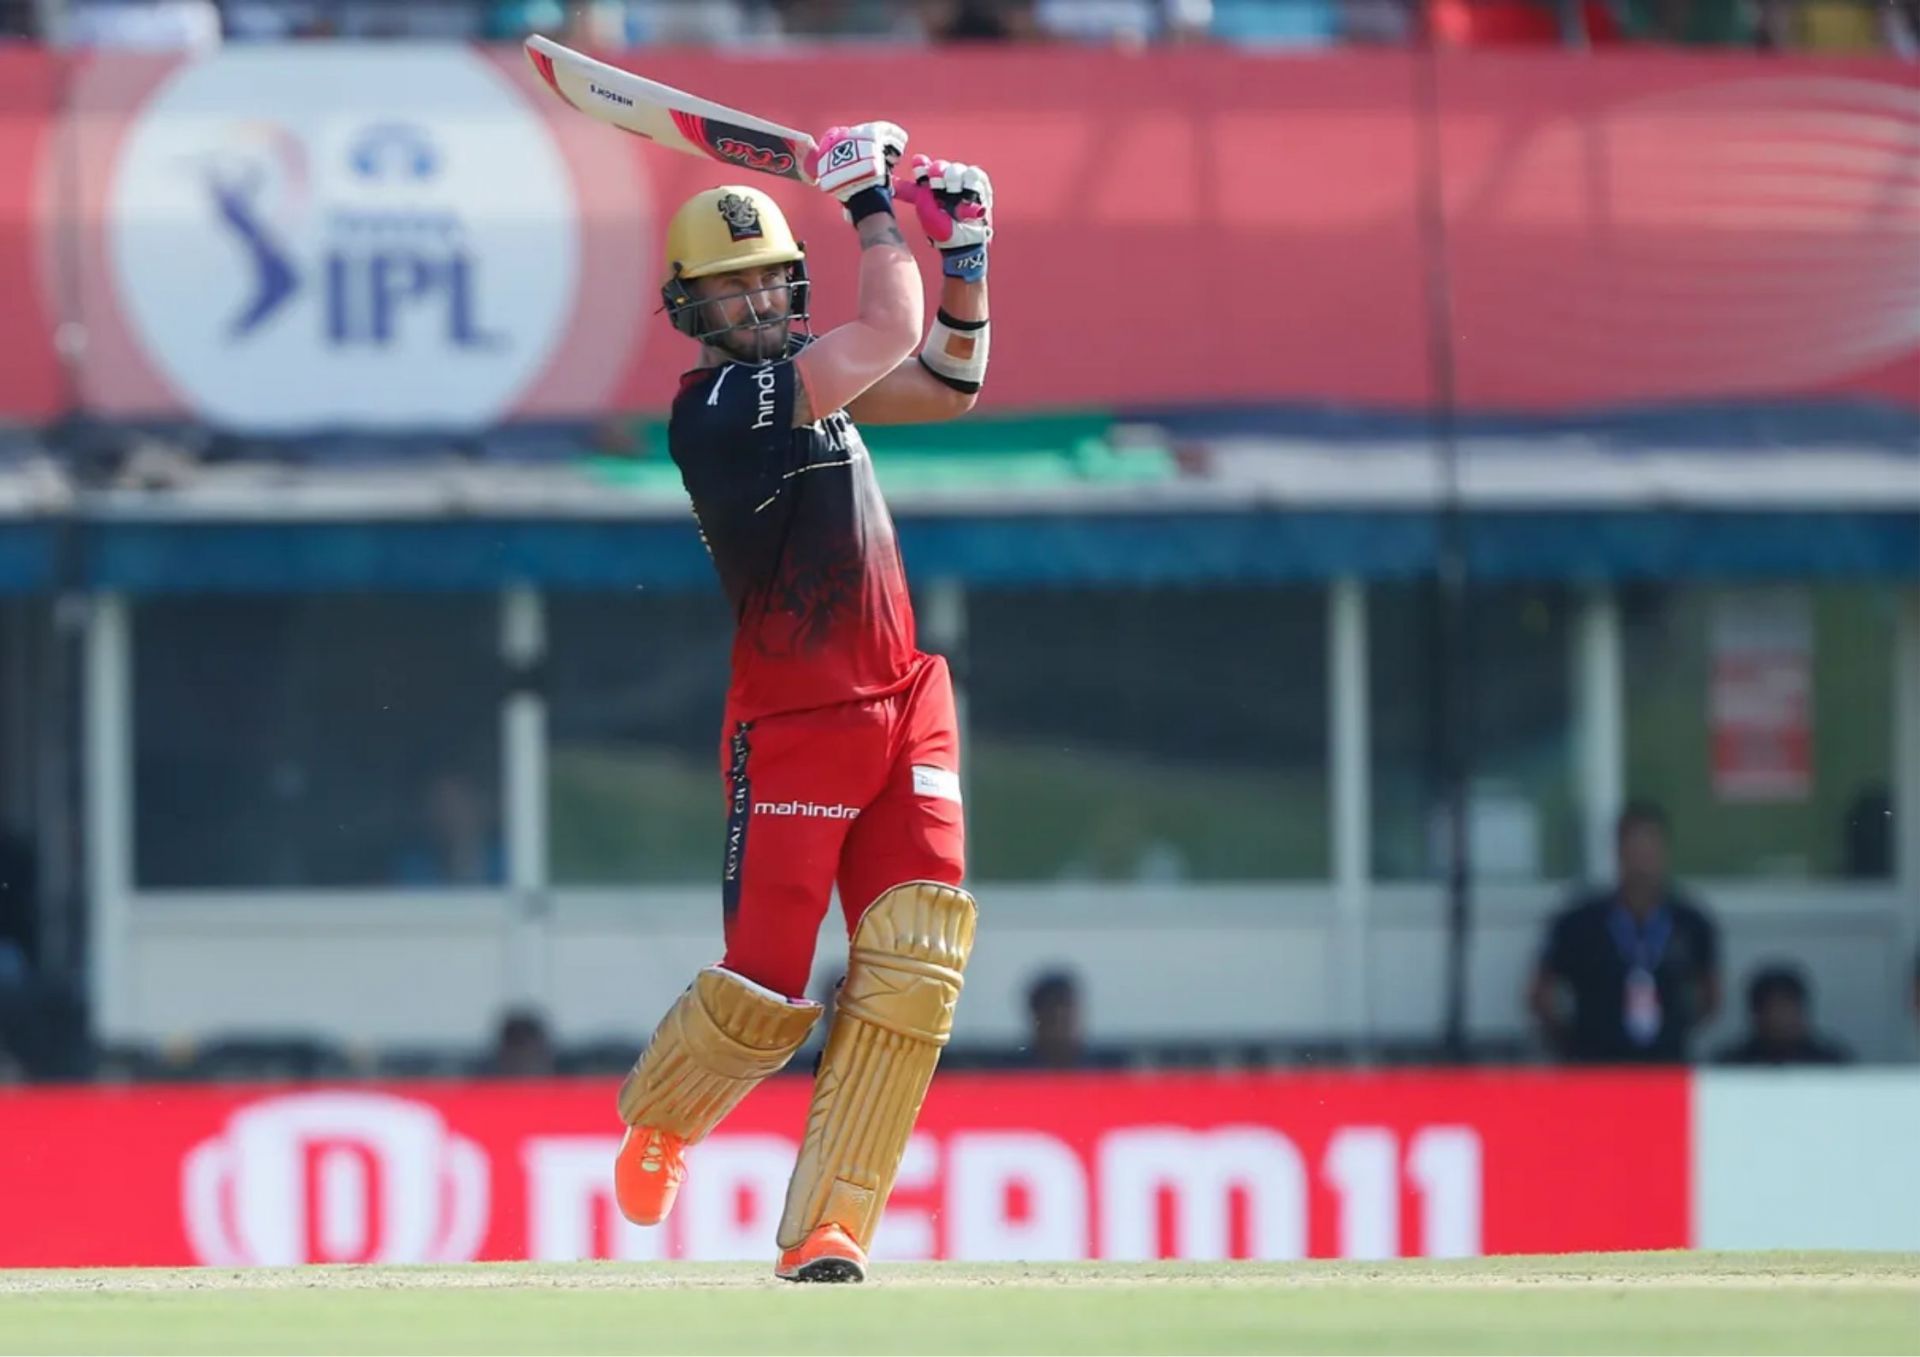 Faf du Plessis has been unstoppable at the top of the order for RCB (Picture Credits: BCCI).